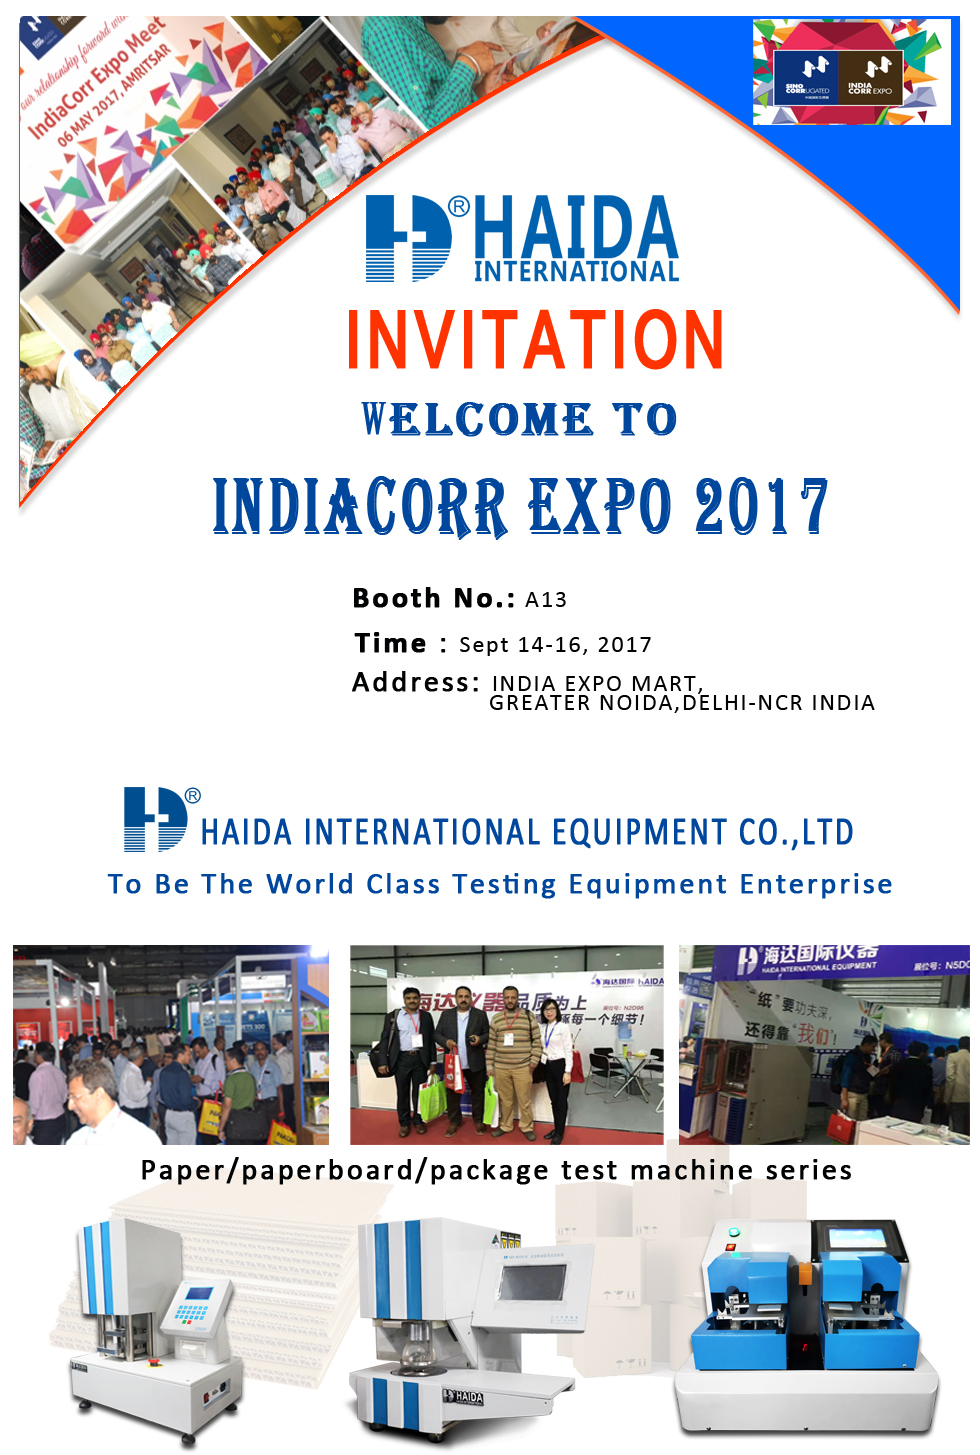 Welcome to Haida booth in IndiaCorr Expo 2017 Exhibitions 